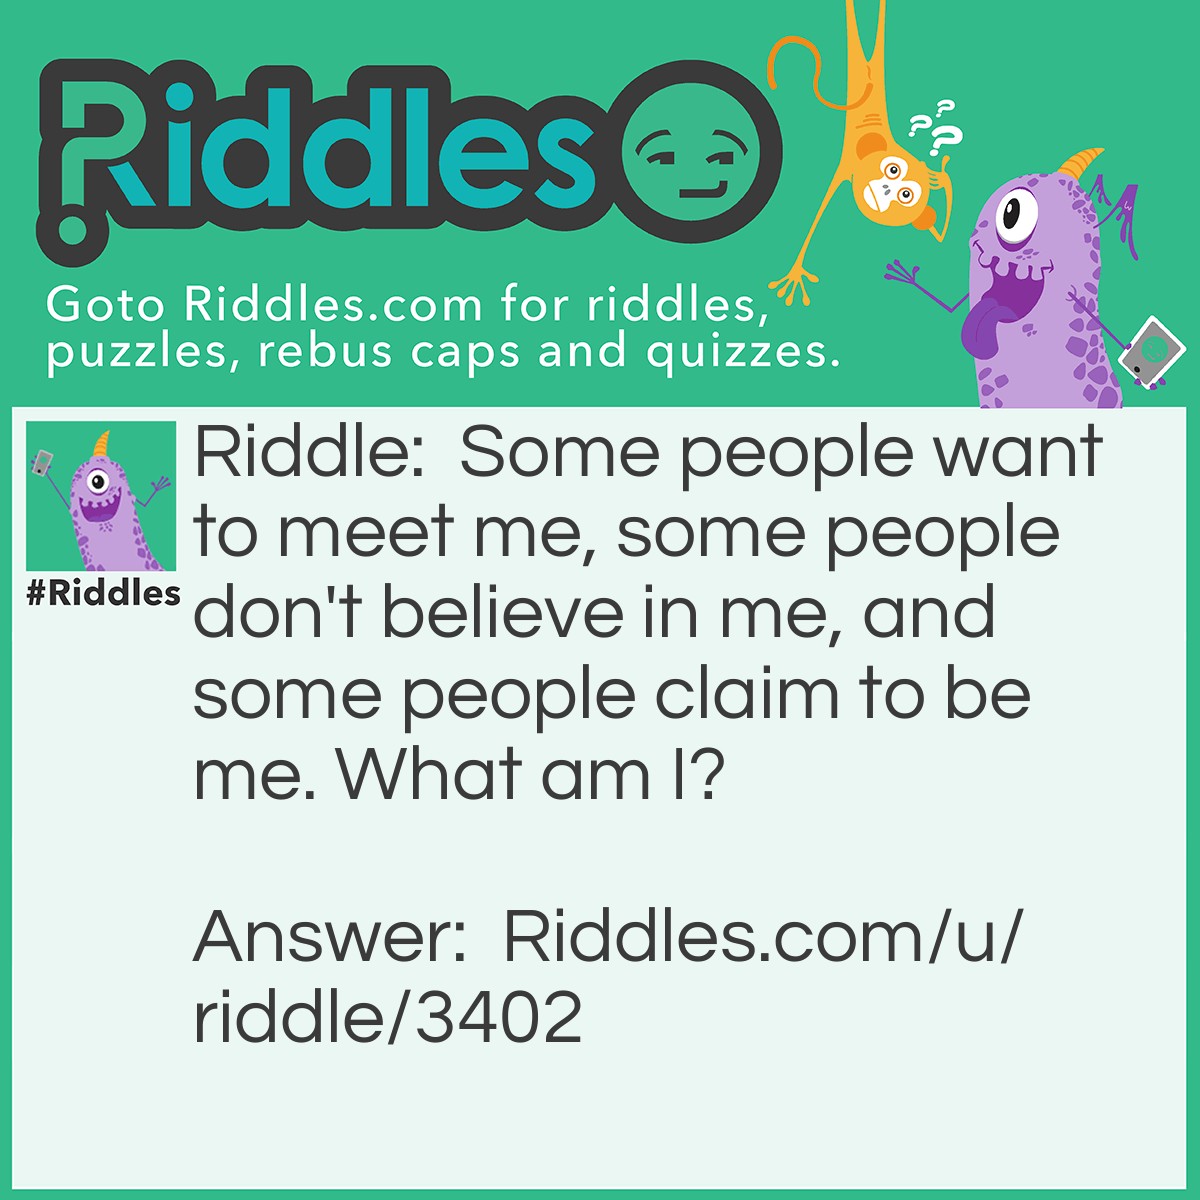 Riddle: Some people want to meet me, some people don't believe in me, and some people claim to be me. What am I? Answer: God.